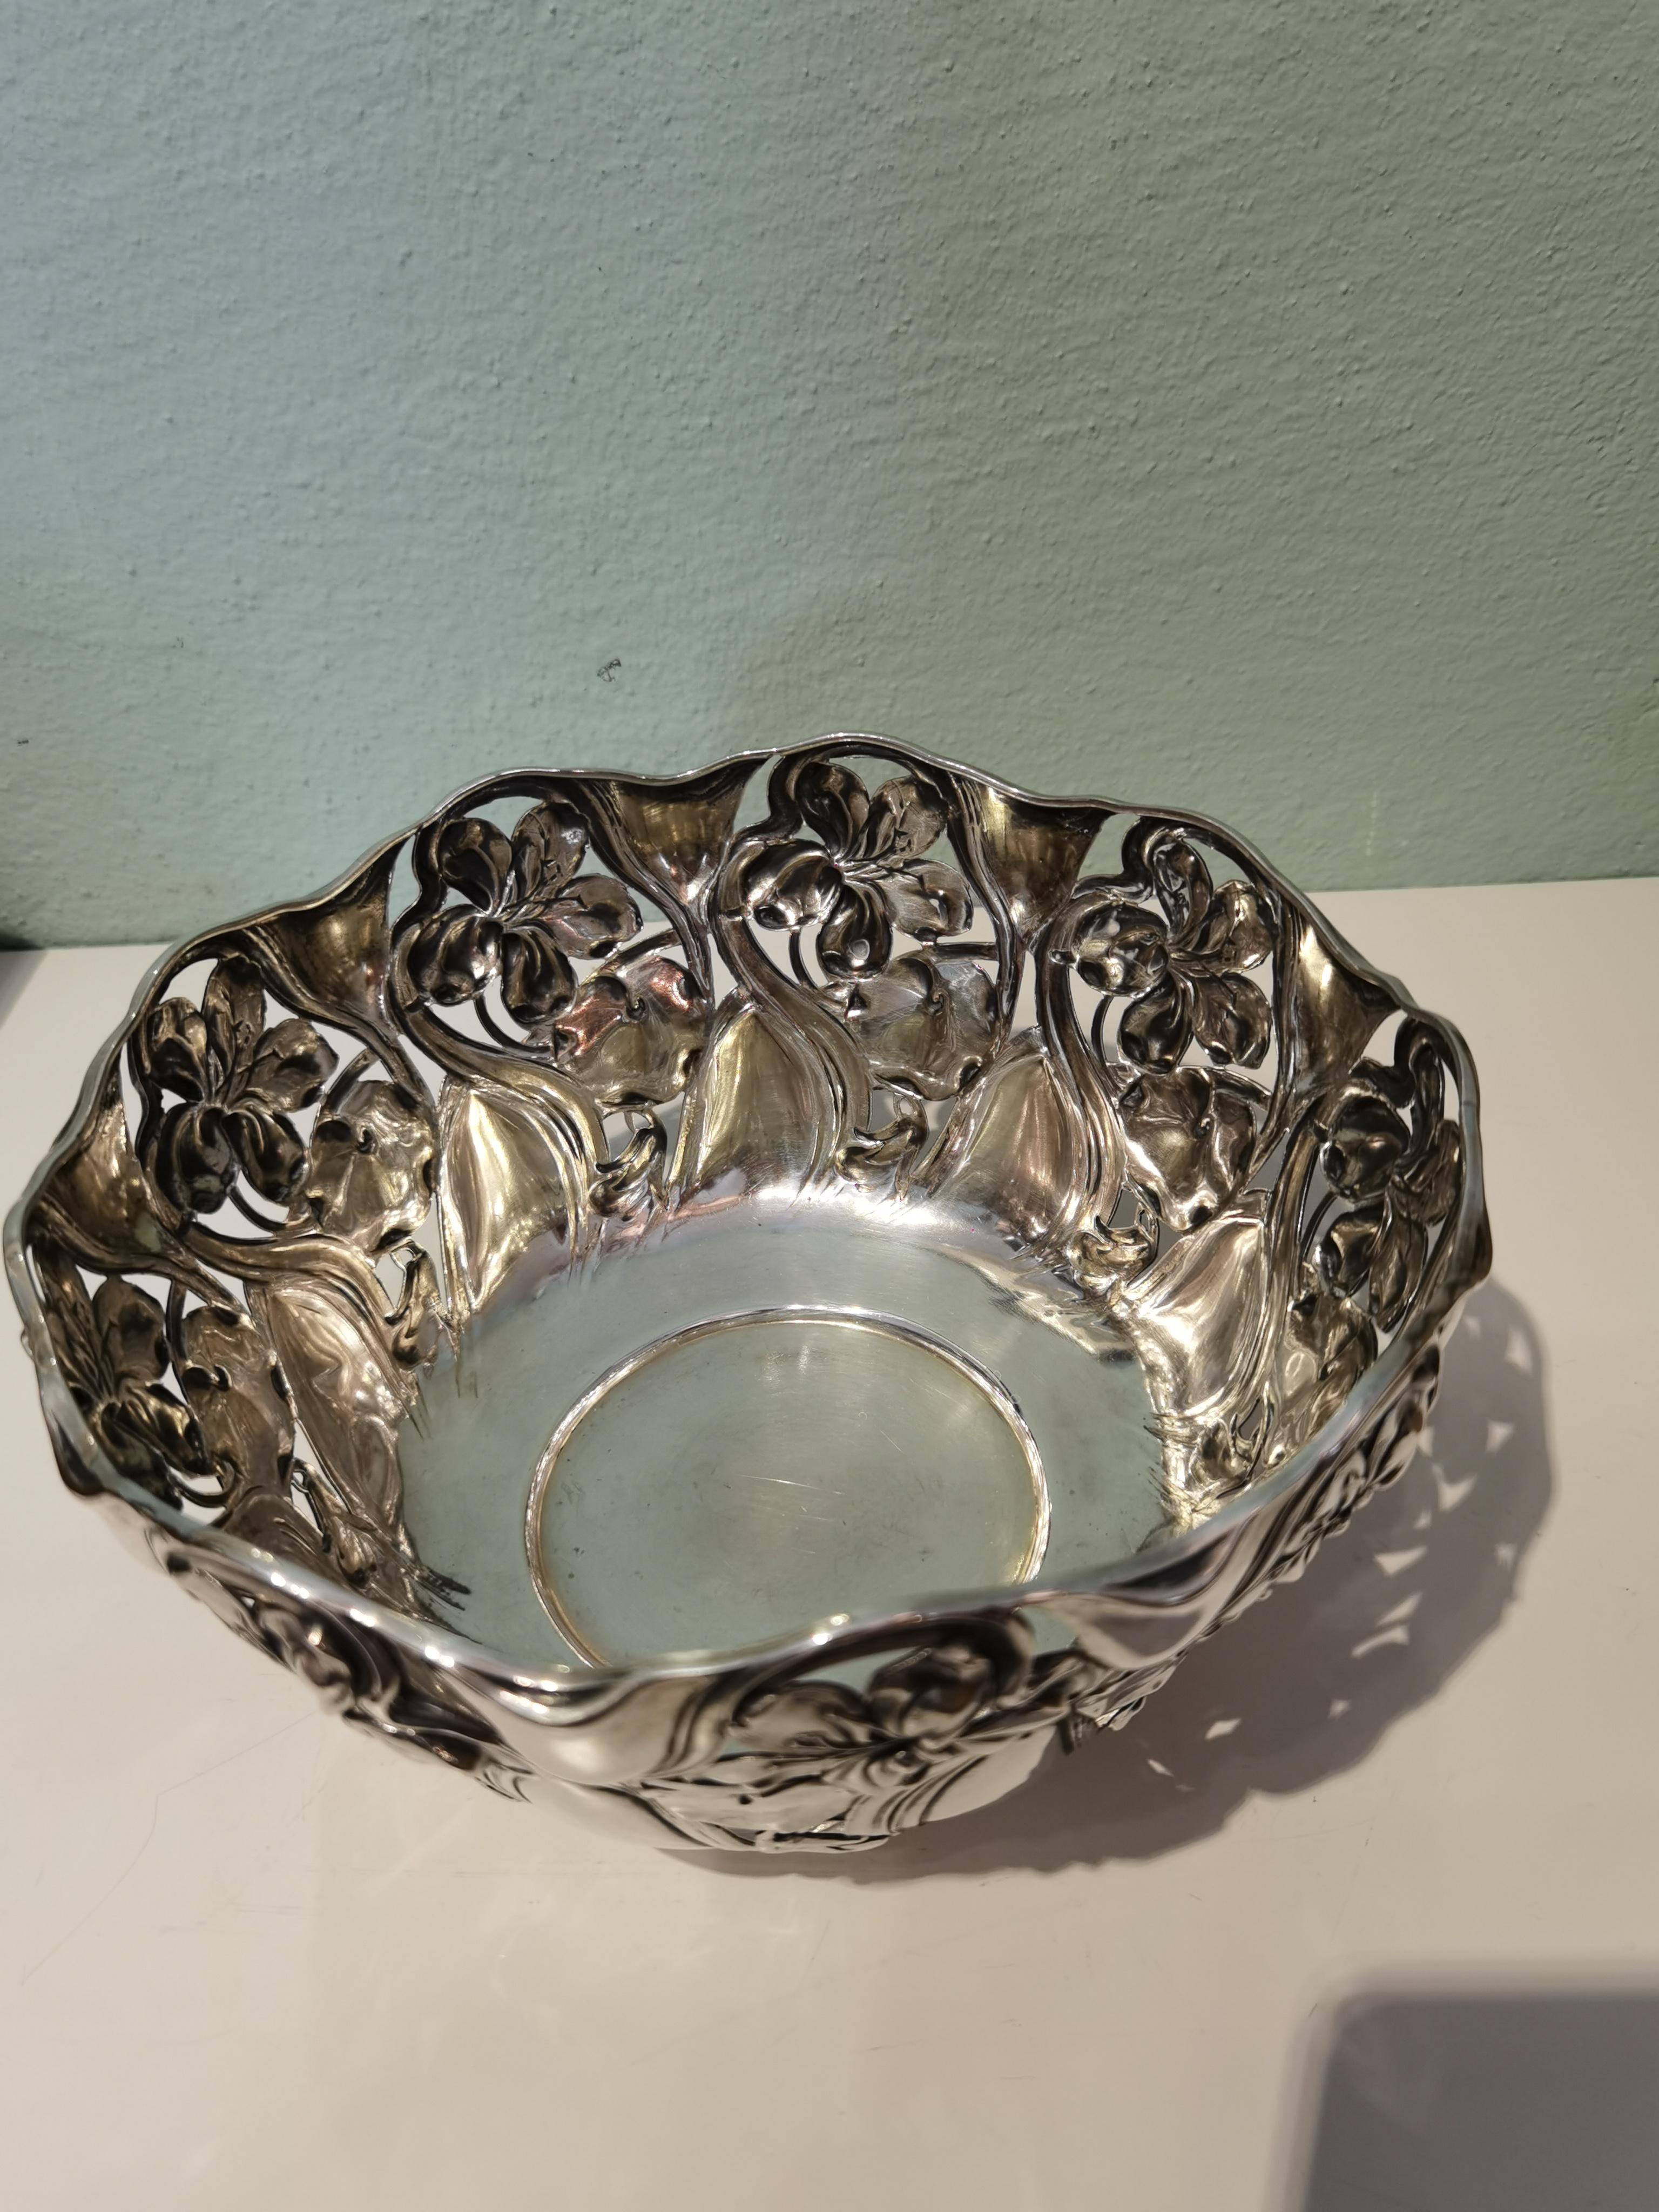 Large Art Deco silver bowl in 800 silver with a naturalistic formed garland of waterlilies blossoms and leaves. Stamped with the hallmarks from Netherlands. Backside stamped 800 silver. Model nr 30.